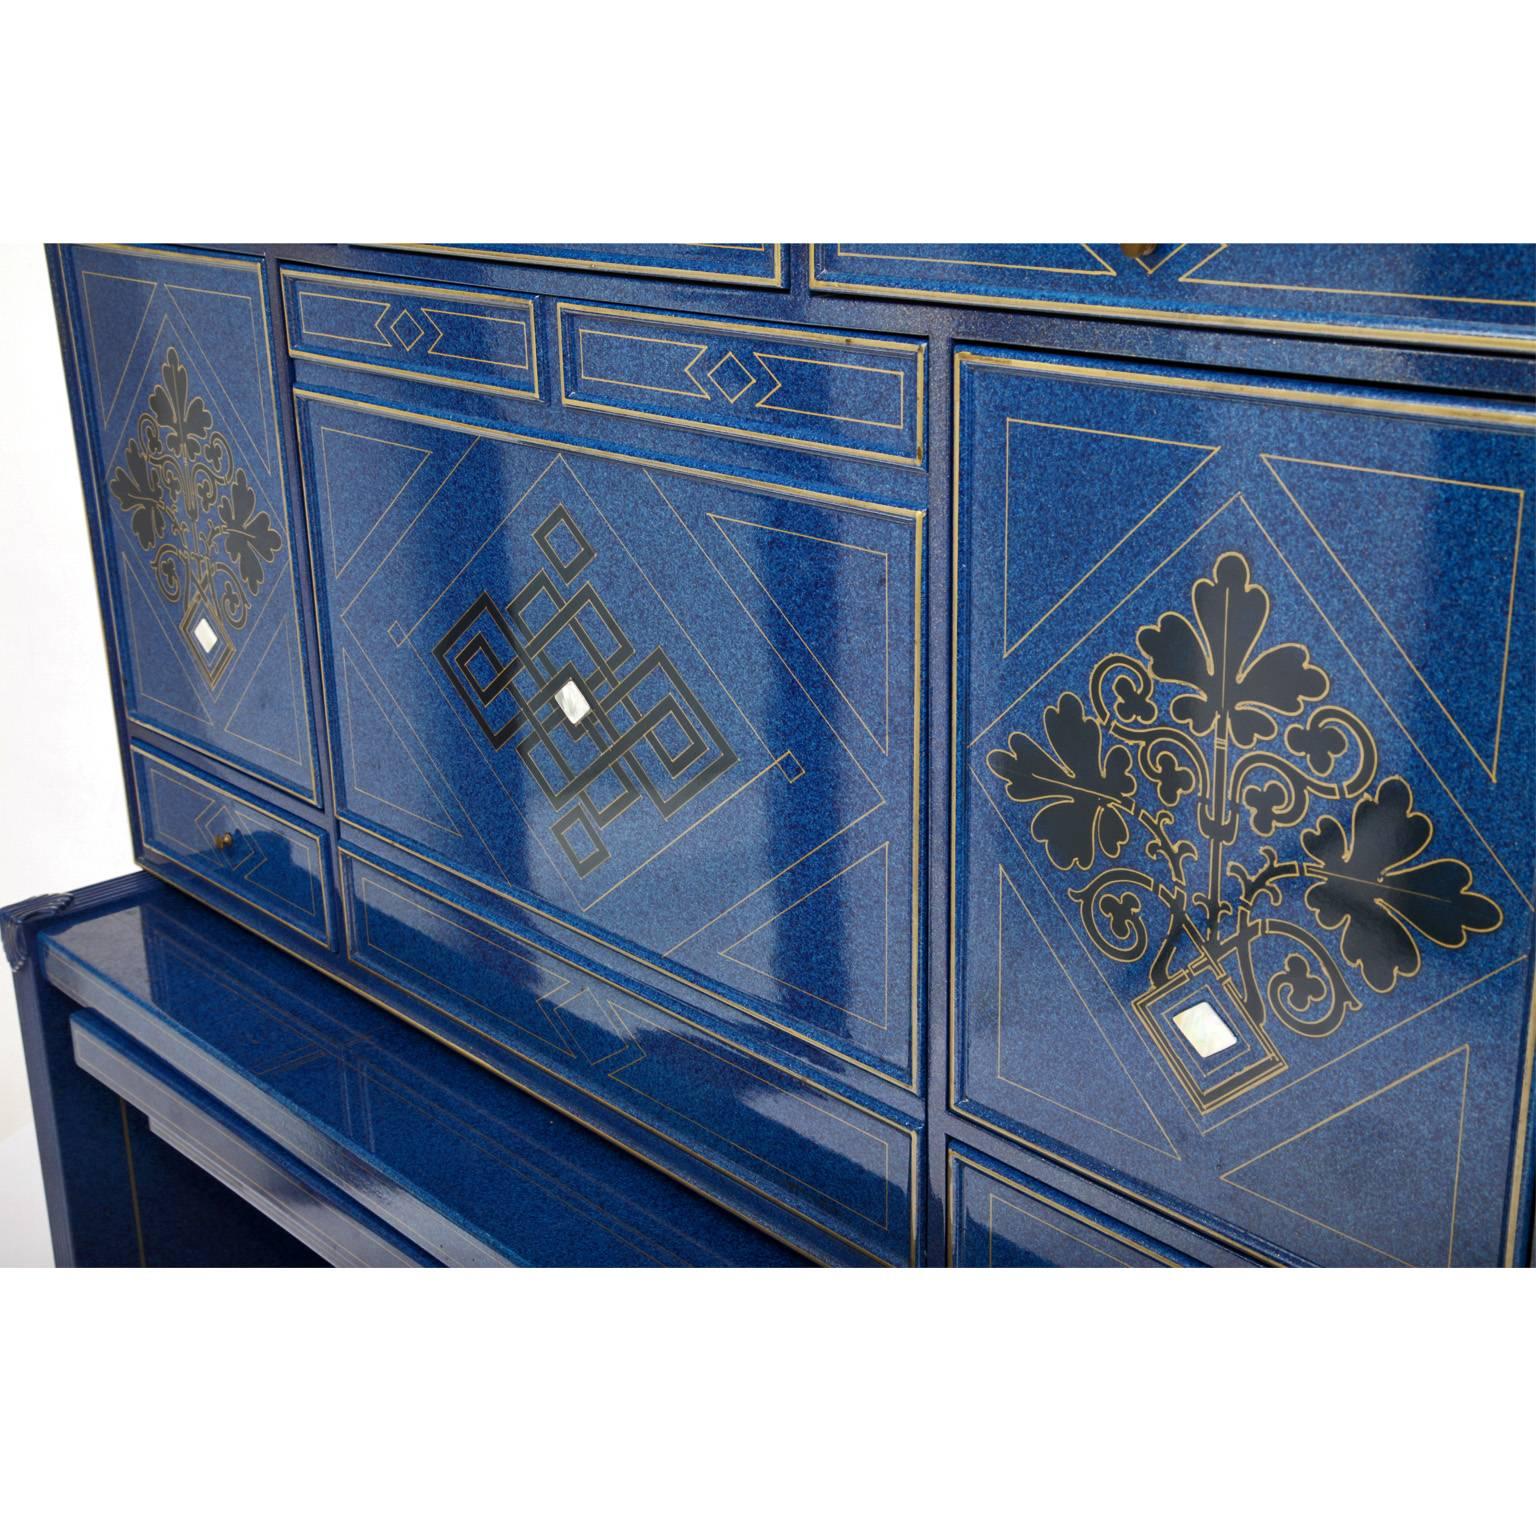 Unusual secretaire, lacquered in blue with rhomboid and leaves decor. The top has a foldable writing surface and several drawers and compartments. The large drawer underneath has the manufacturer's label inside. The lacquer is original and shows